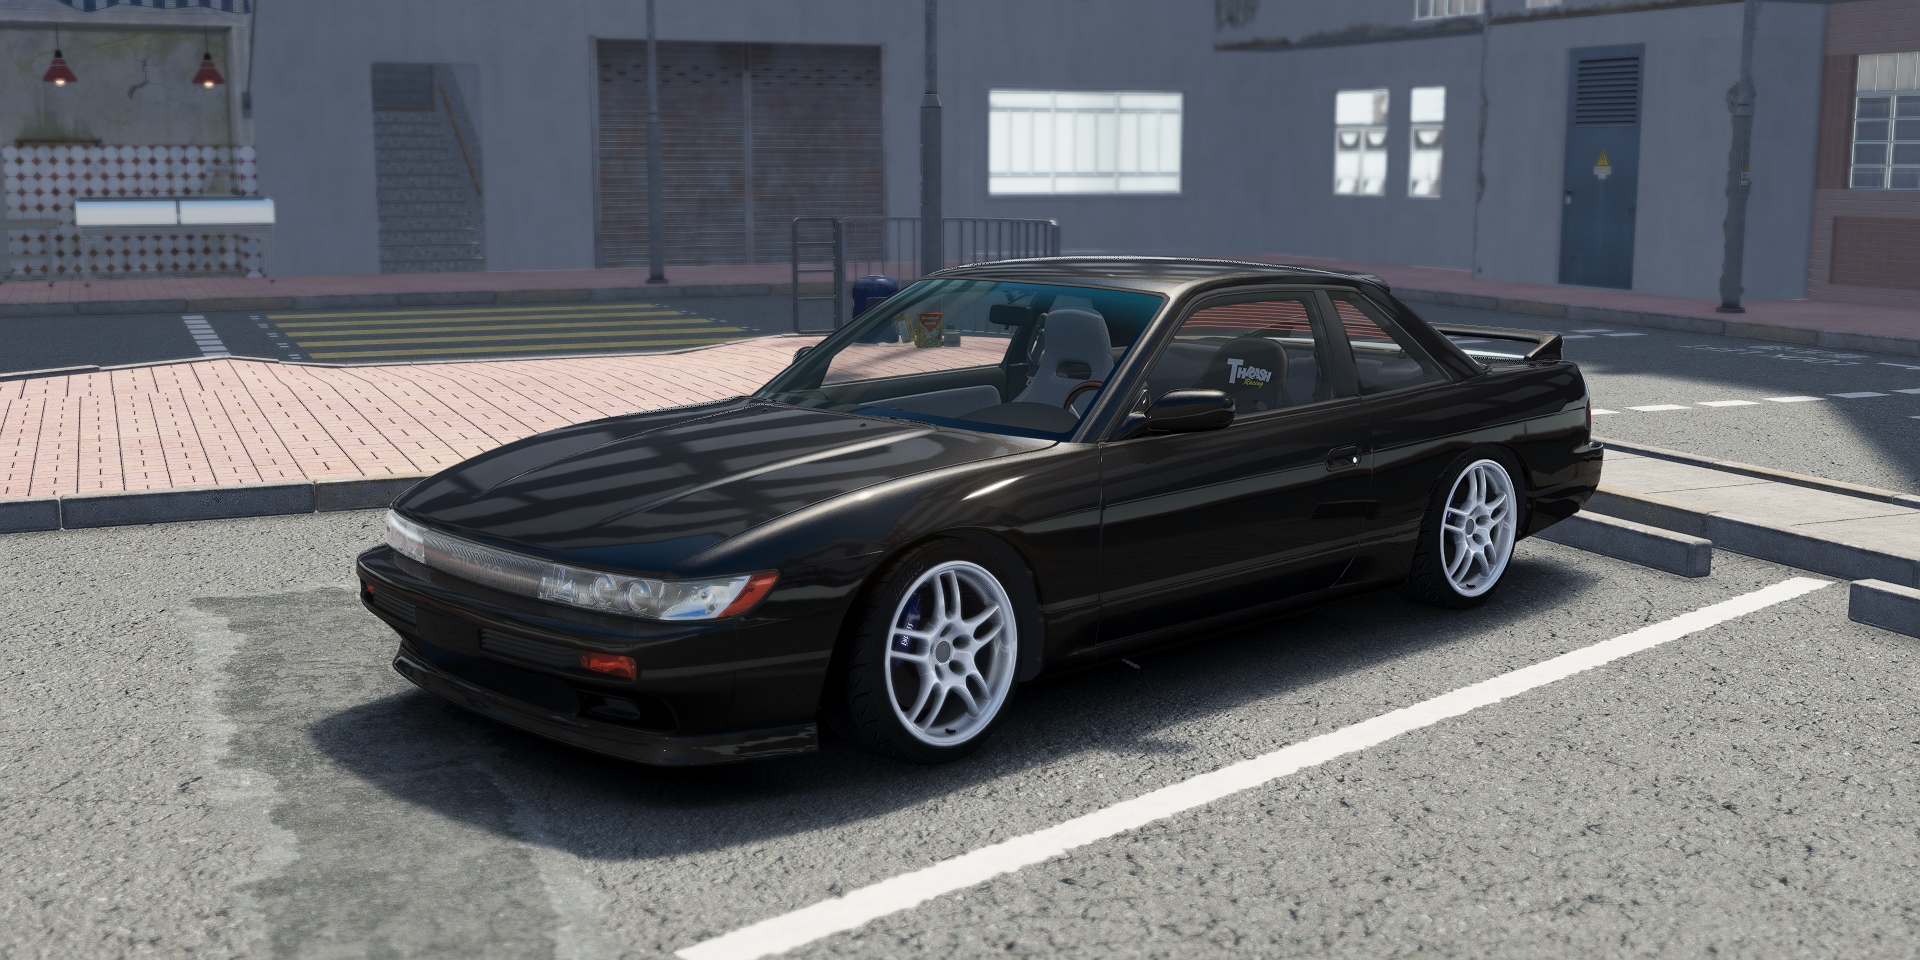 DWG Nissan 240sx Sil Swap Preview Image